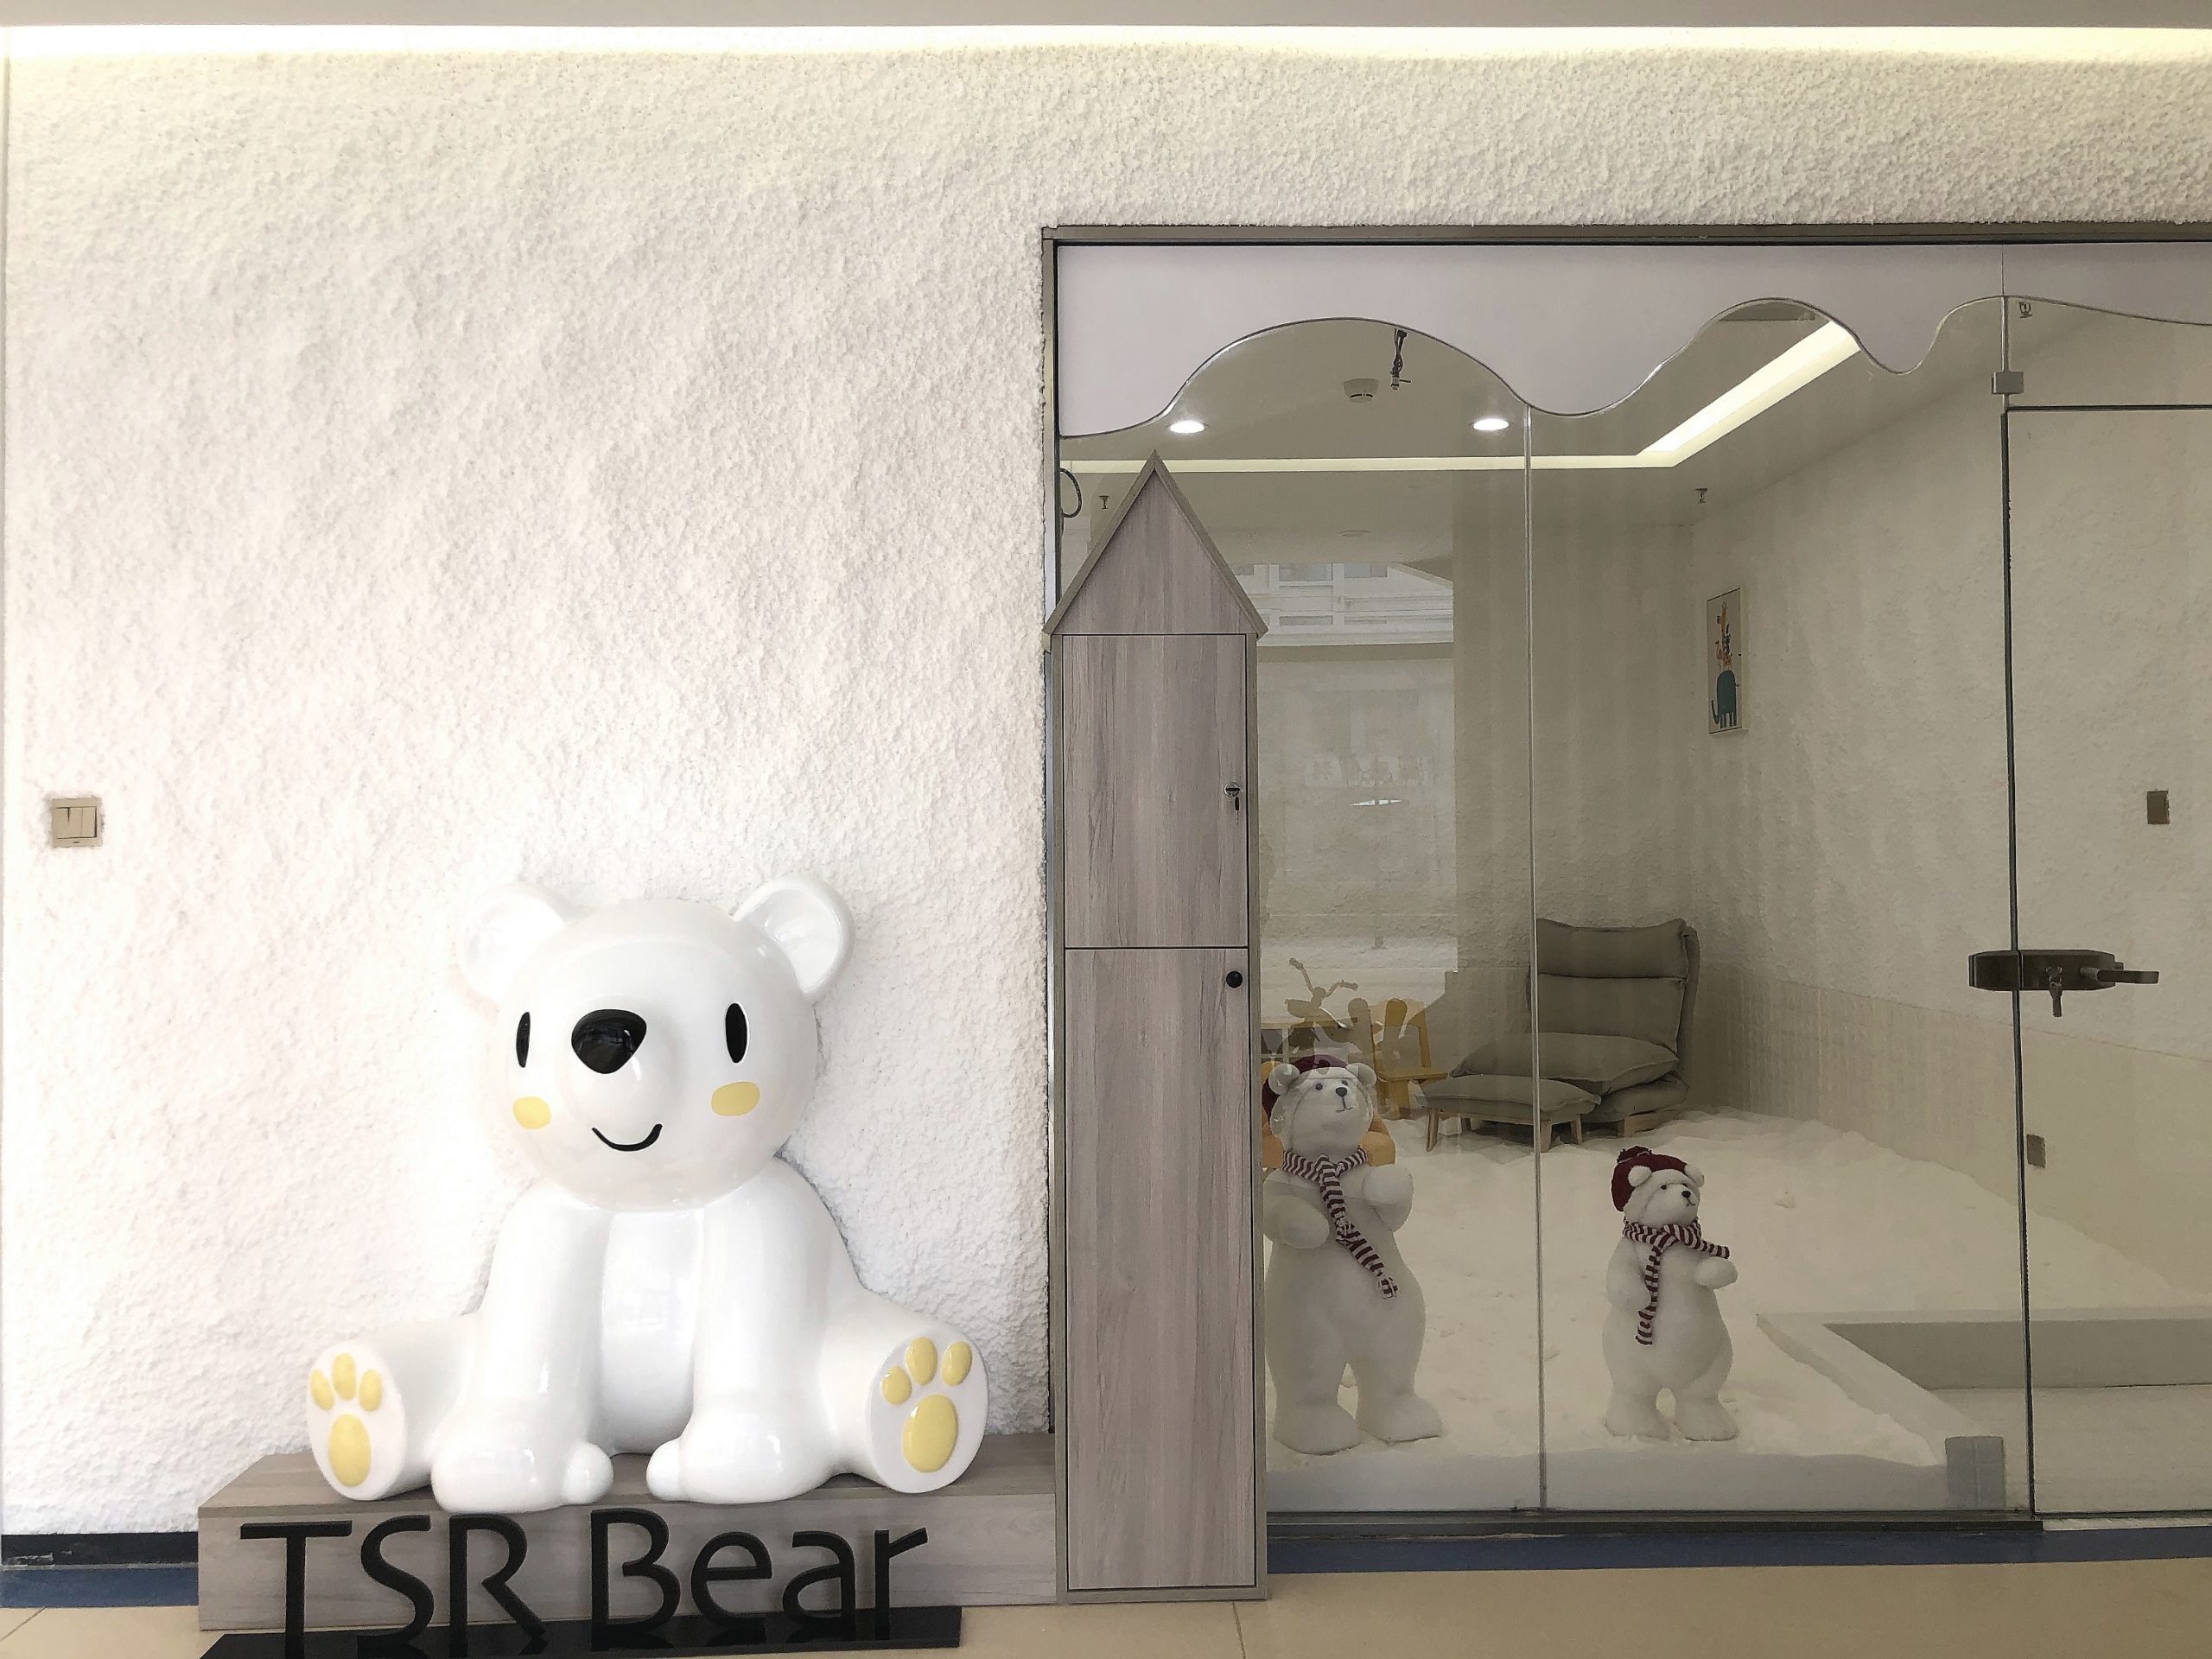 TSR Bear logo looking into a salt-covered room with a chaises and two polar bears décor facing out.